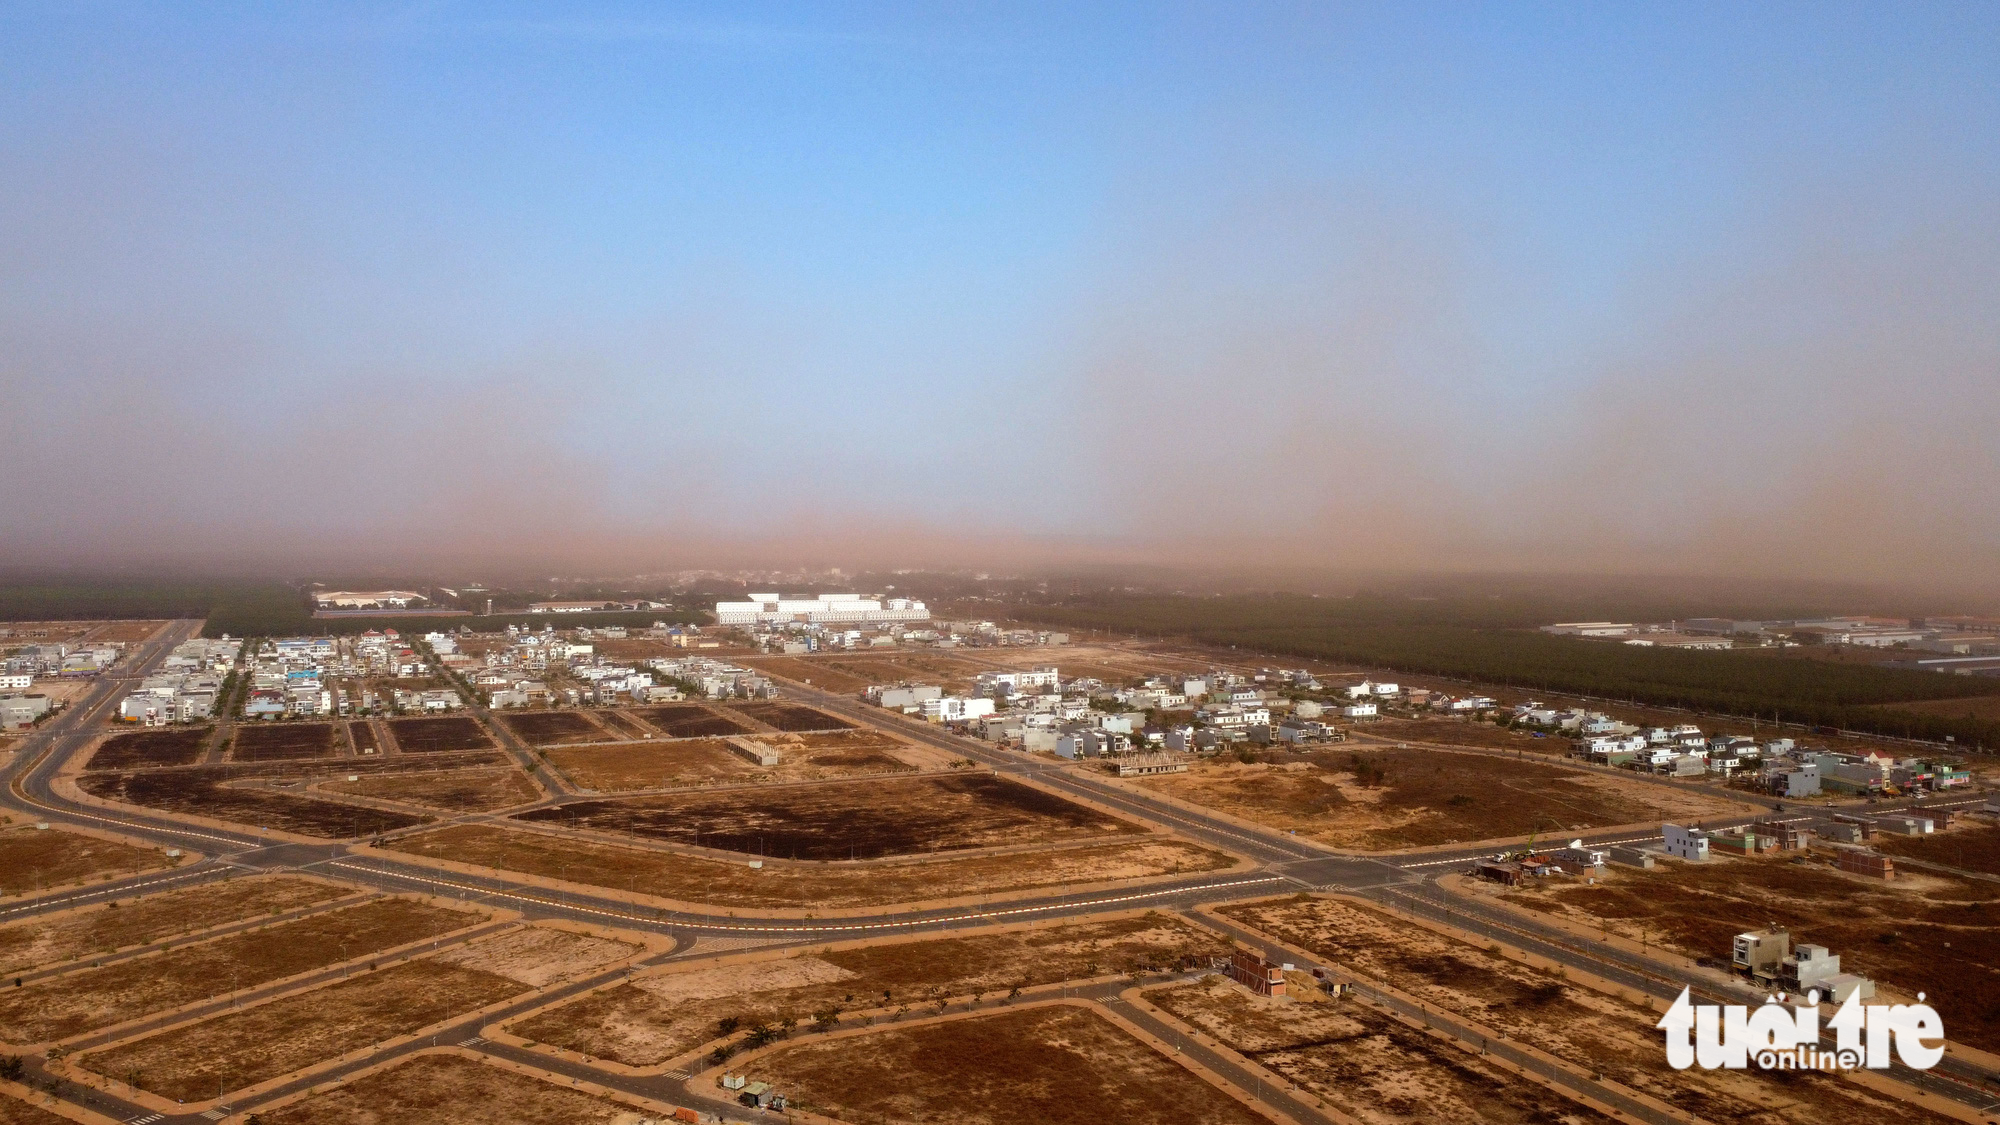 Dust blankets an area near the construction site of the Long Thanh International Airport project in Dong Nai Province, southern Vietnam. Photo: A Loc / Tuoi Tre